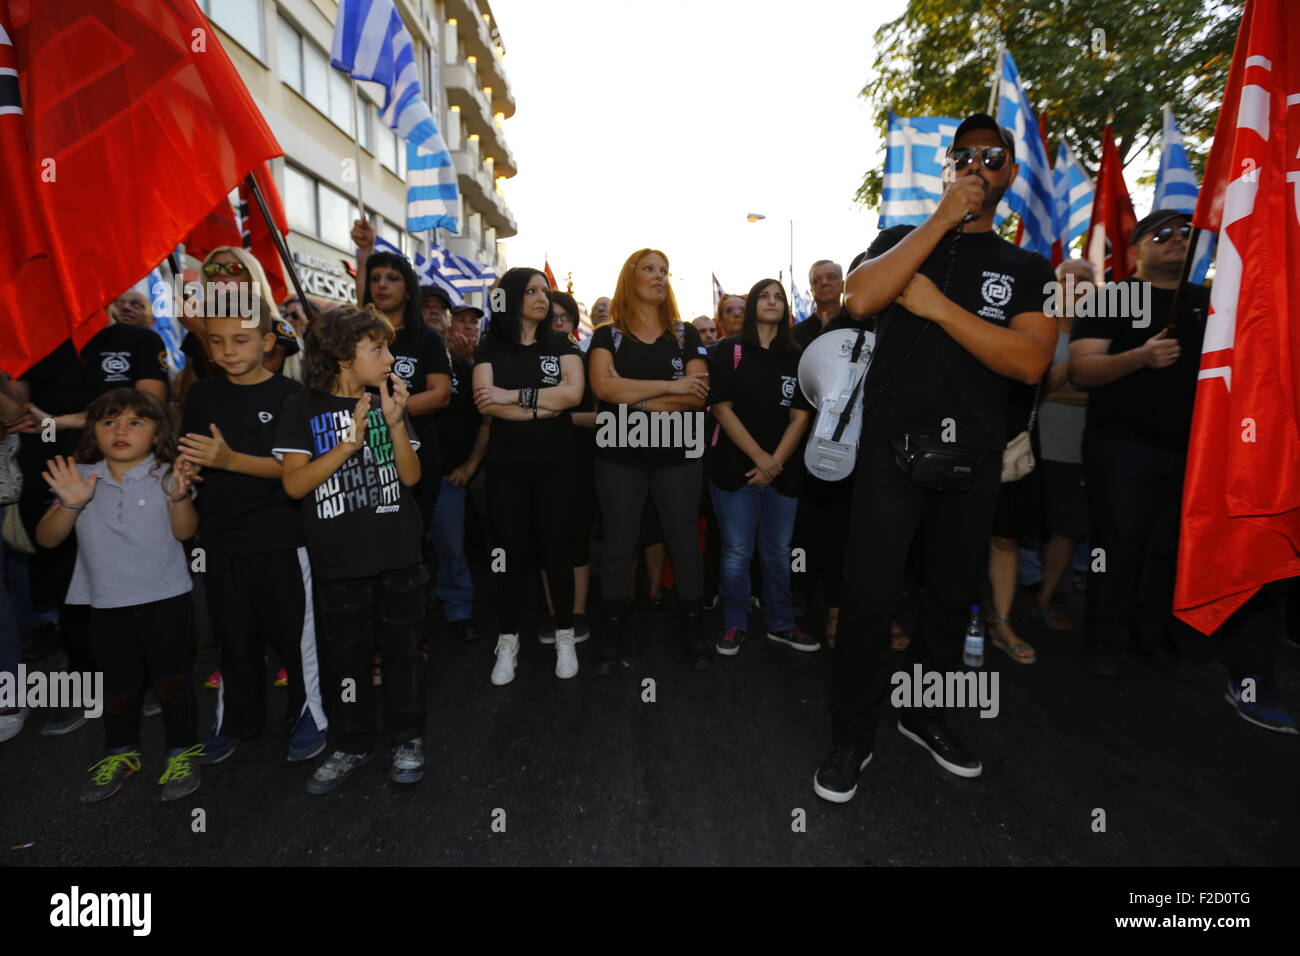 Athens, Greece. 16th September 2015. A man shouts slogans to the crowd through a megaphone at the Golden Dawn election rally. Greek right wing  party Golden Dawn held an election rally in Athens, four days ahead of election day. The party hopes to gain enough seats in the election to become the third latest party in the Greek Parliament. Credit:  Michael Debets/Alamy Live News Stock Photo